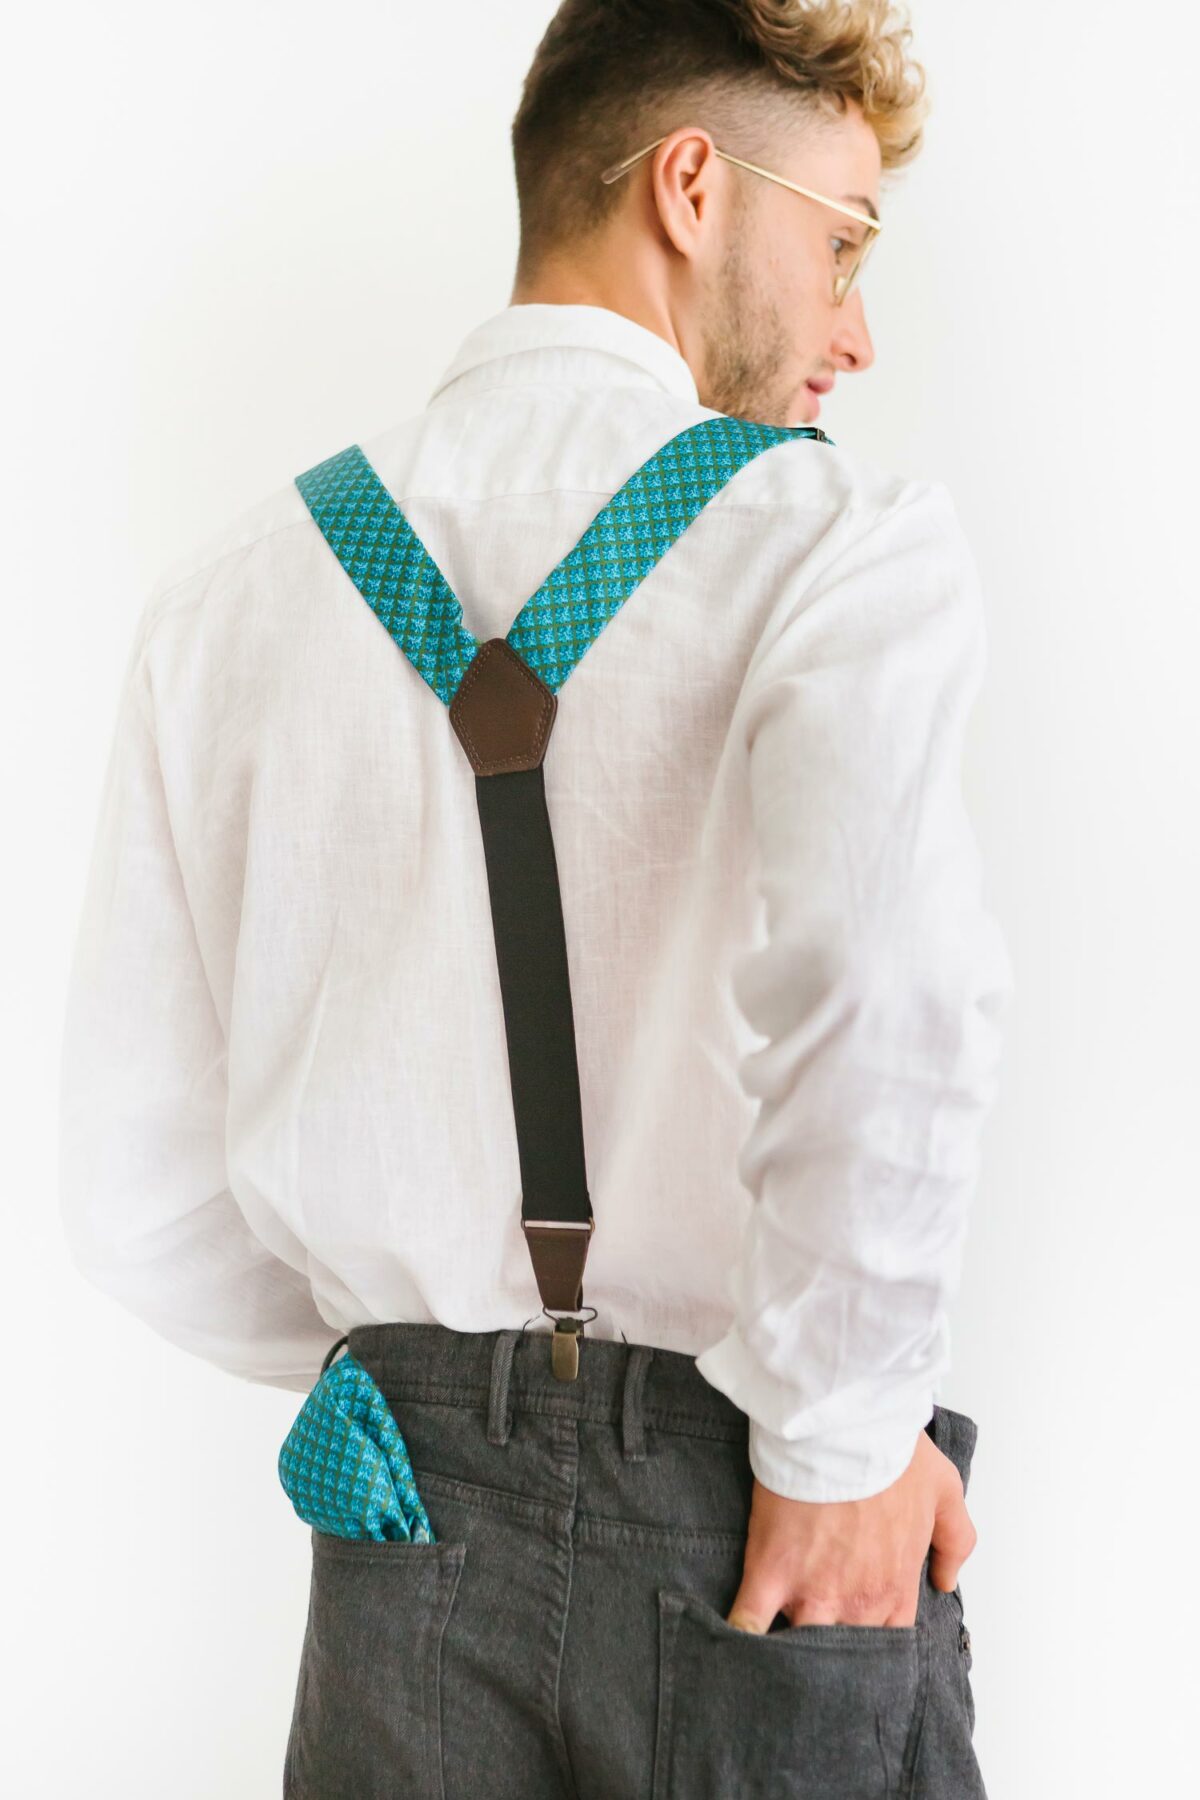 man with blue suspenders